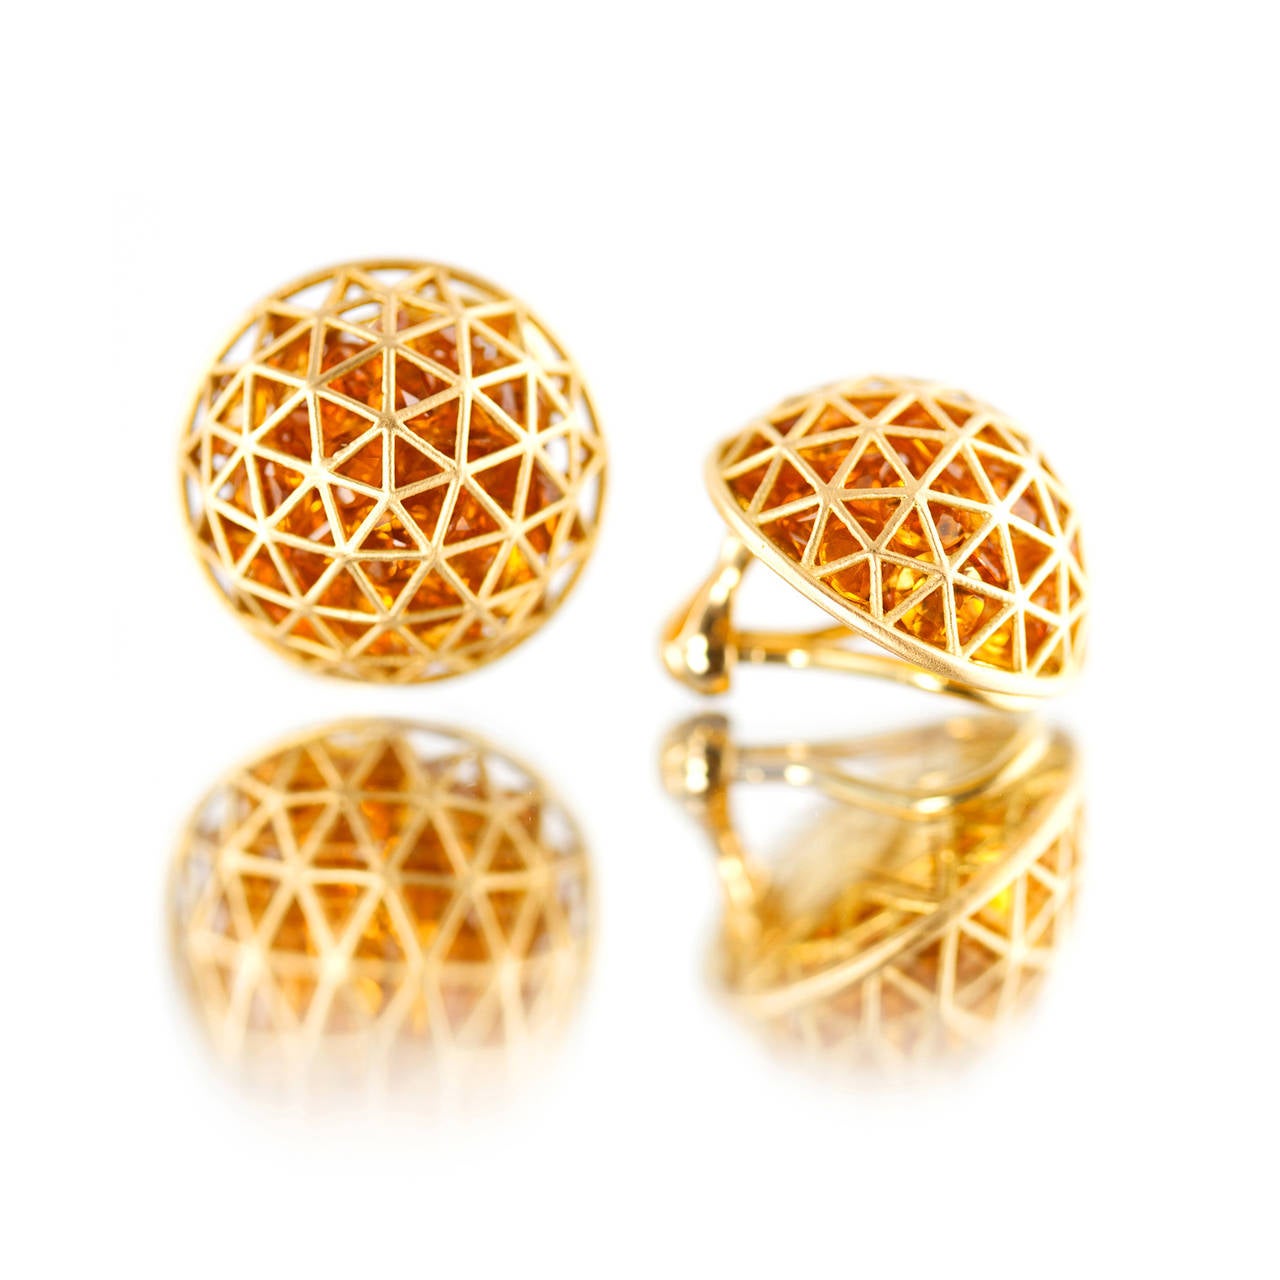 From the Wired Collection, dome earrings in 18k yellow gold with 19 cts of loose mandarin citrines. Satin finish with polished highlights. Geodesic pattern. Clip-on. Diameter 20mm or approx 3/4